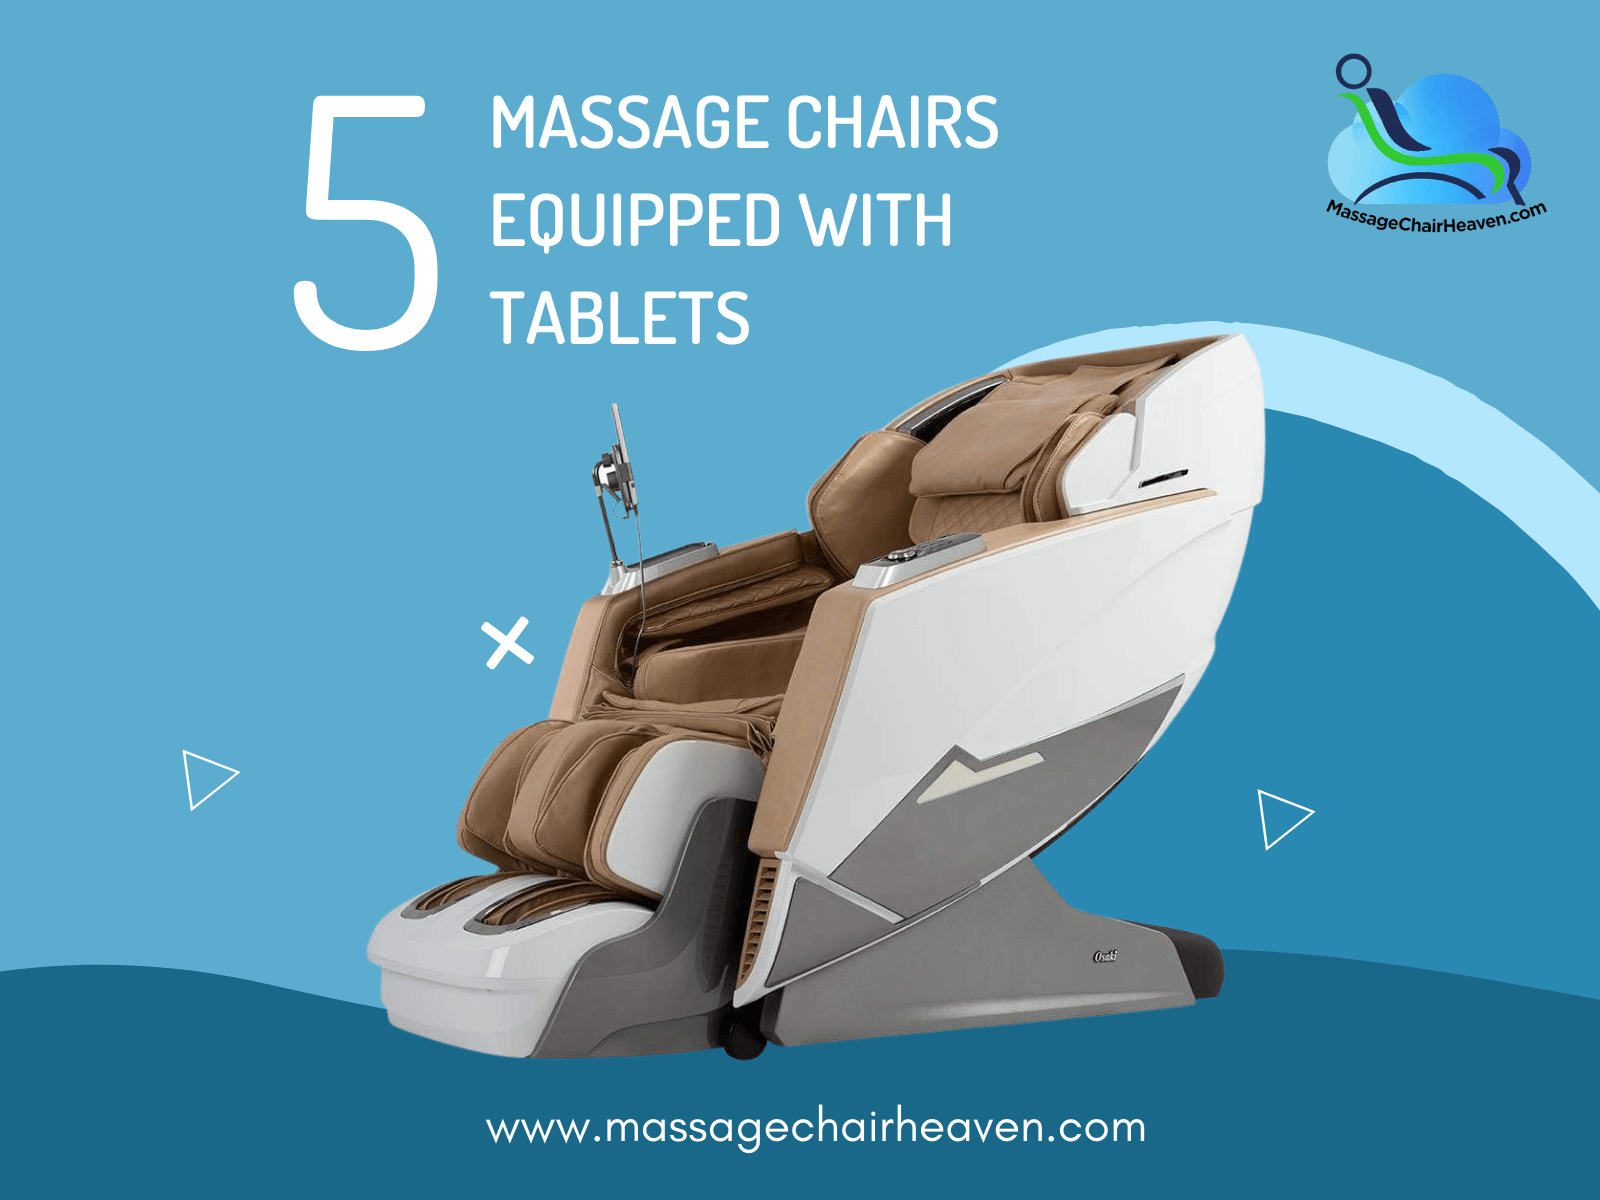 5 Massage Chairs Equipped With Tablets - Massage Chair Heaven